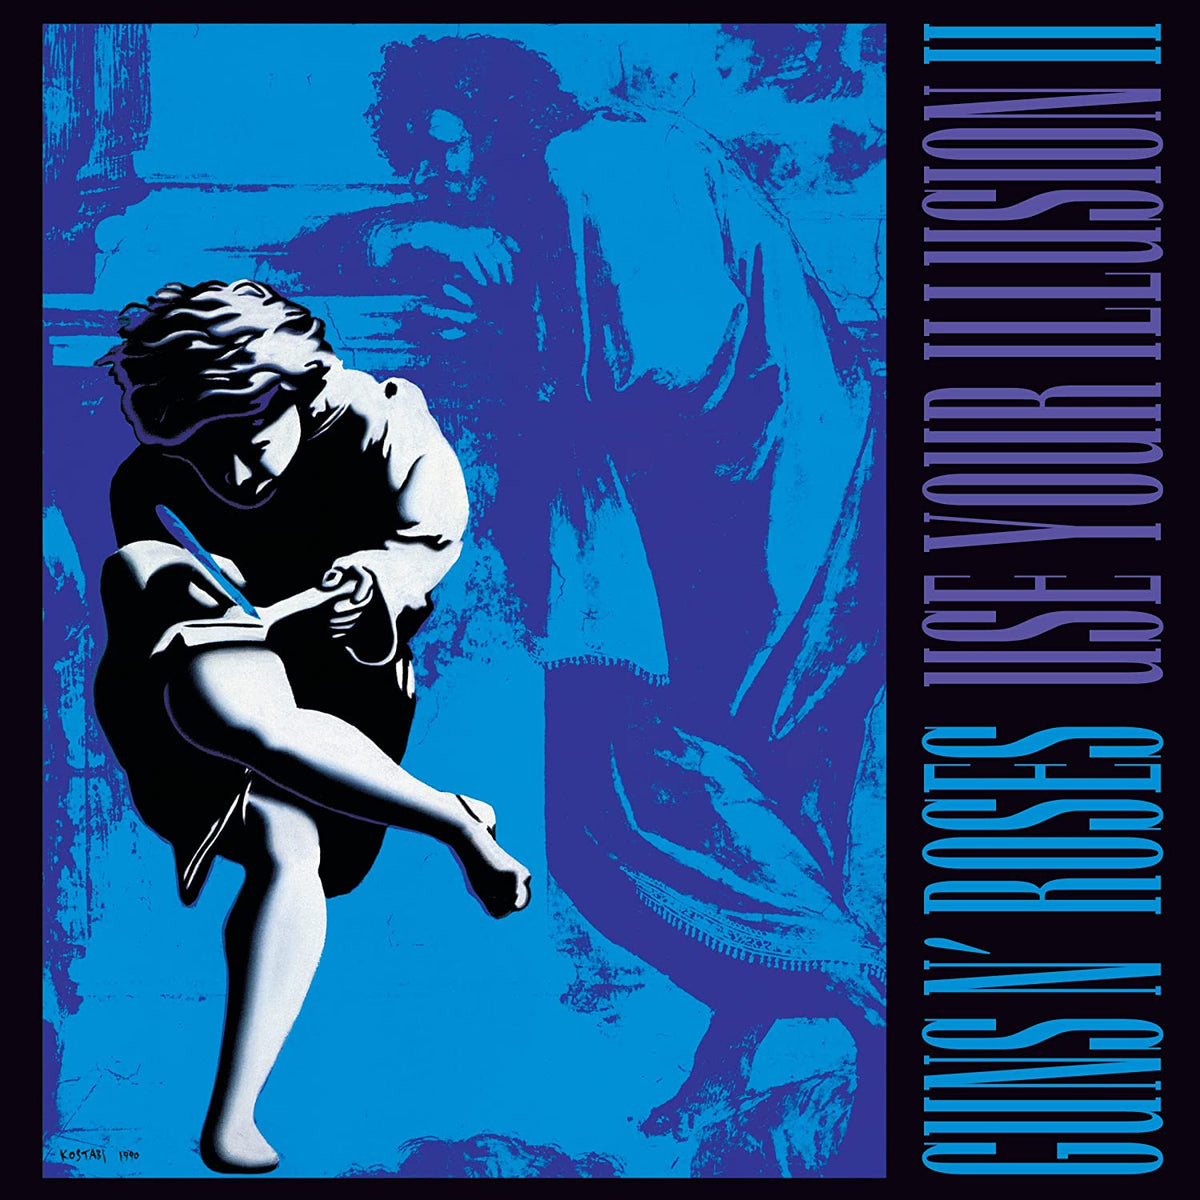 Guns N' Roses - Use Your Illusion II (CD 2022 Reissue)